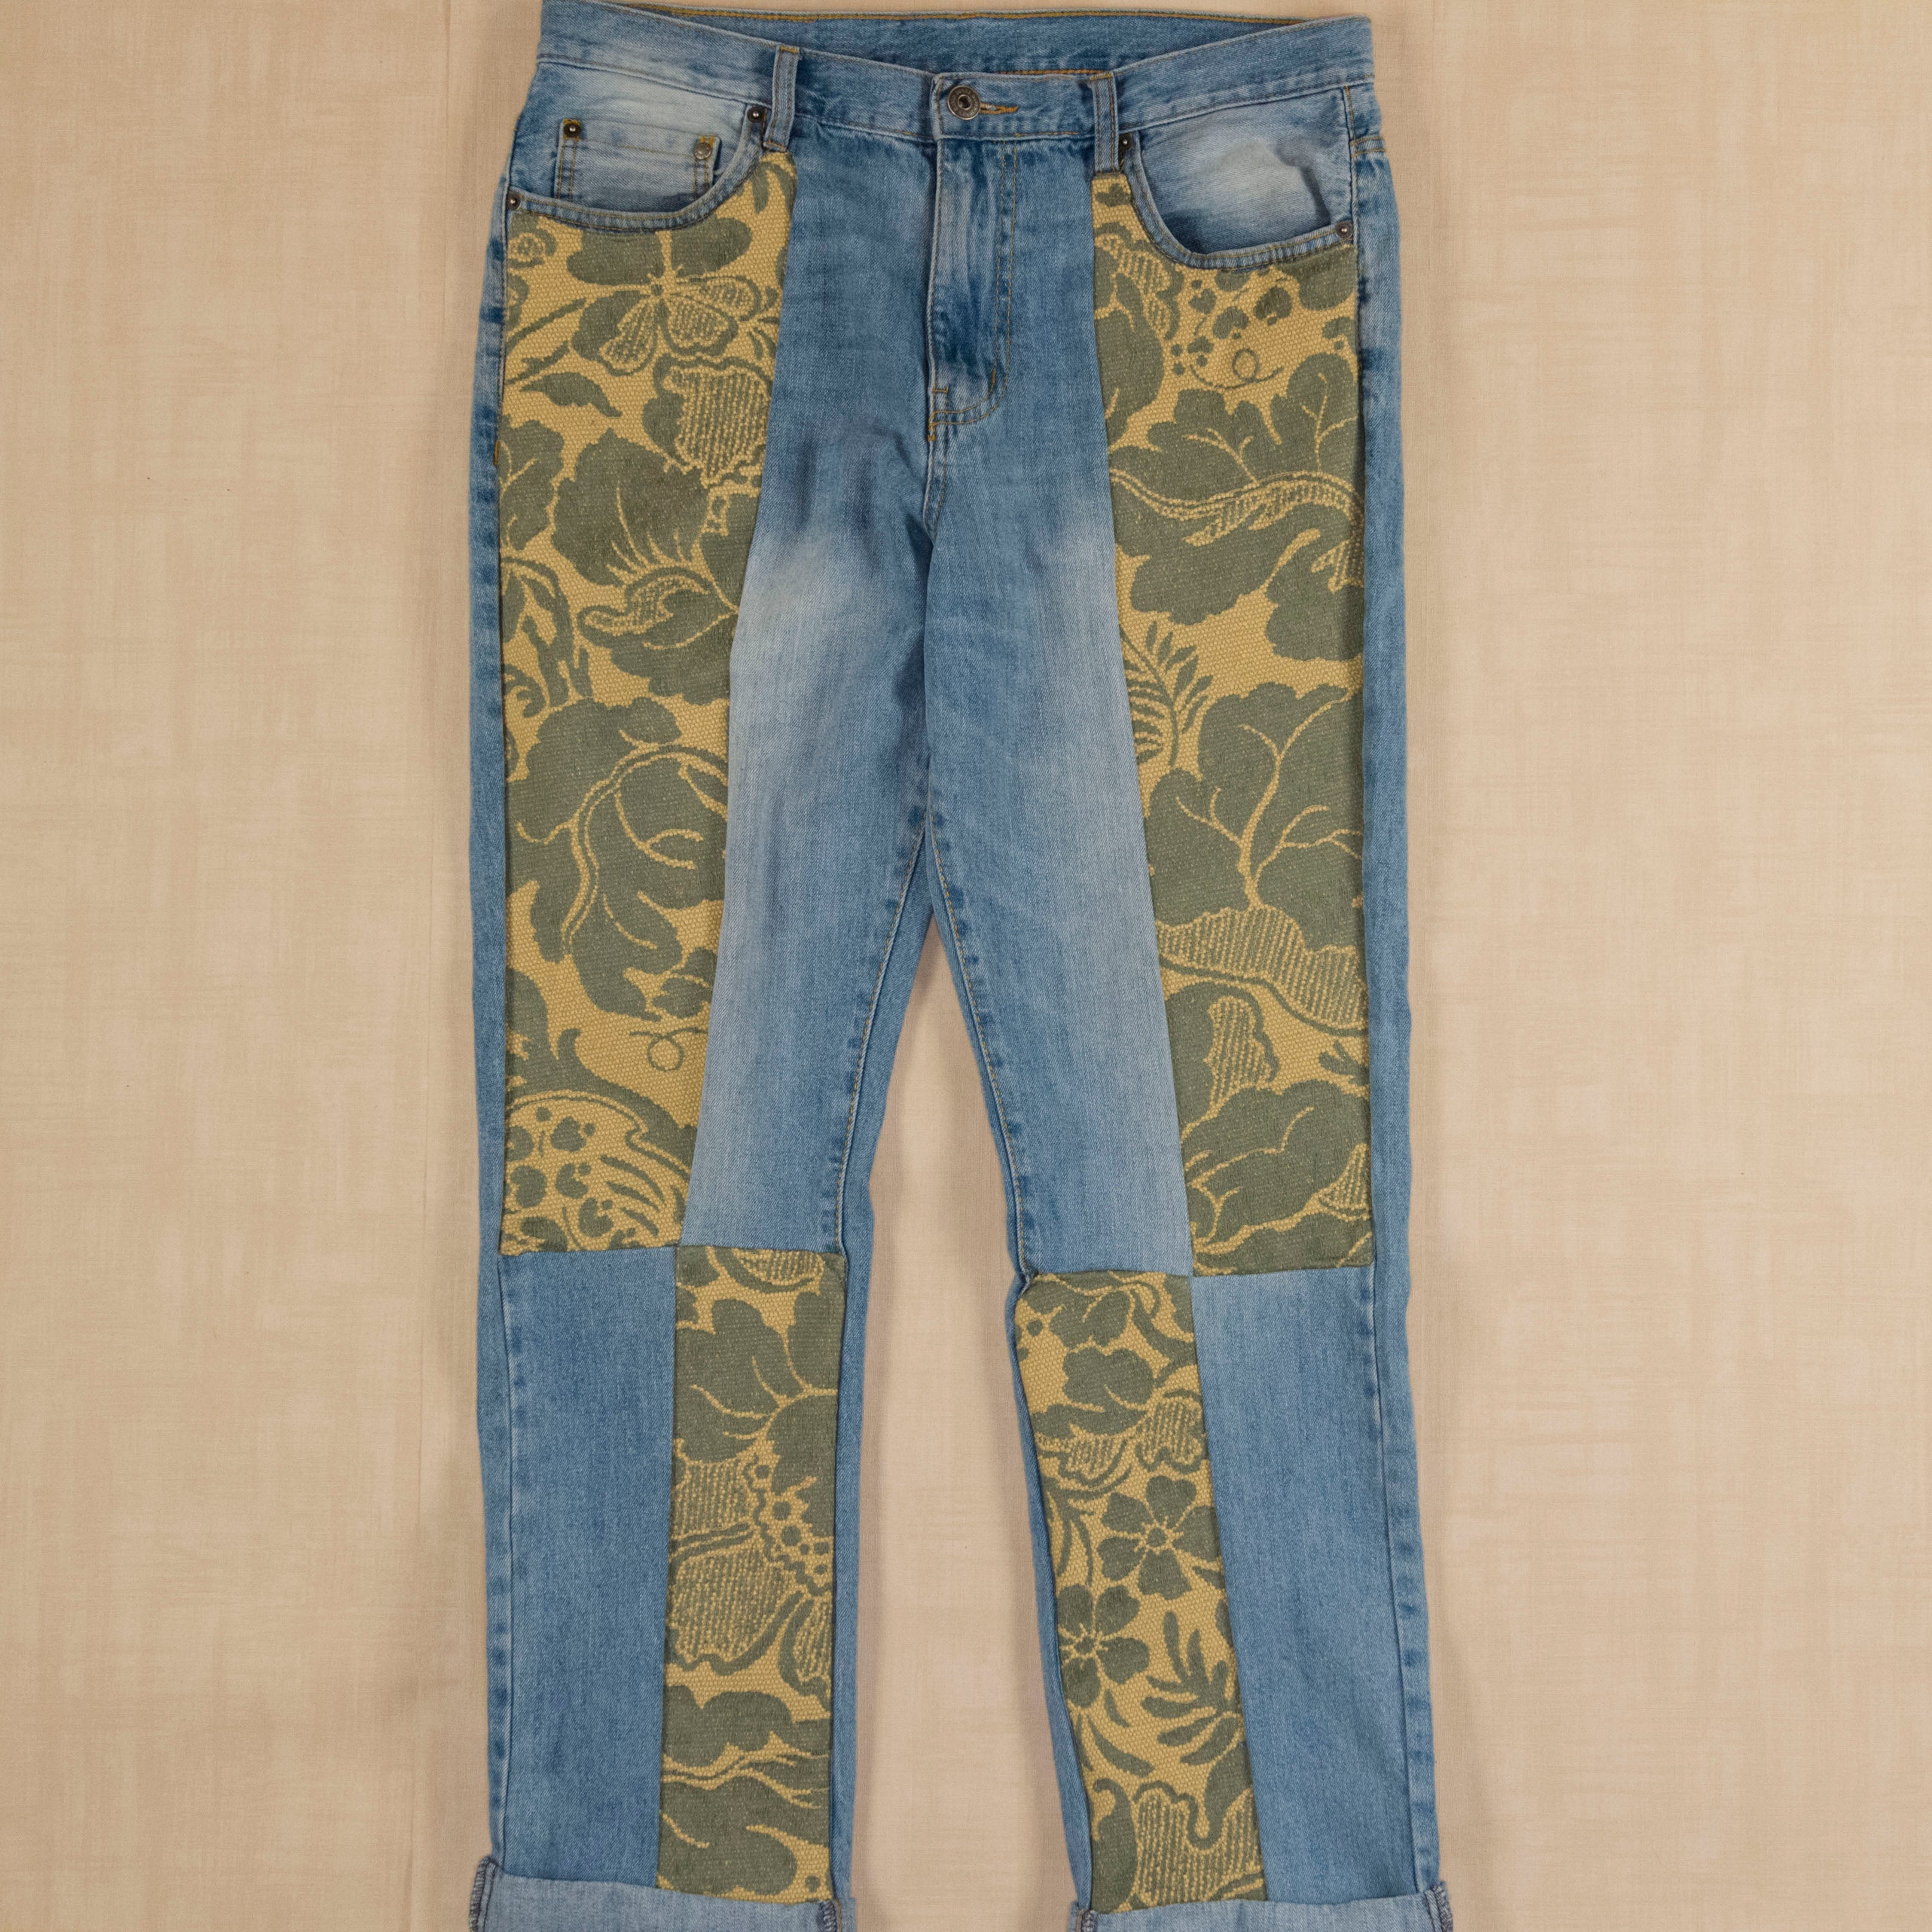 Limited Edition Jeans Upcycled